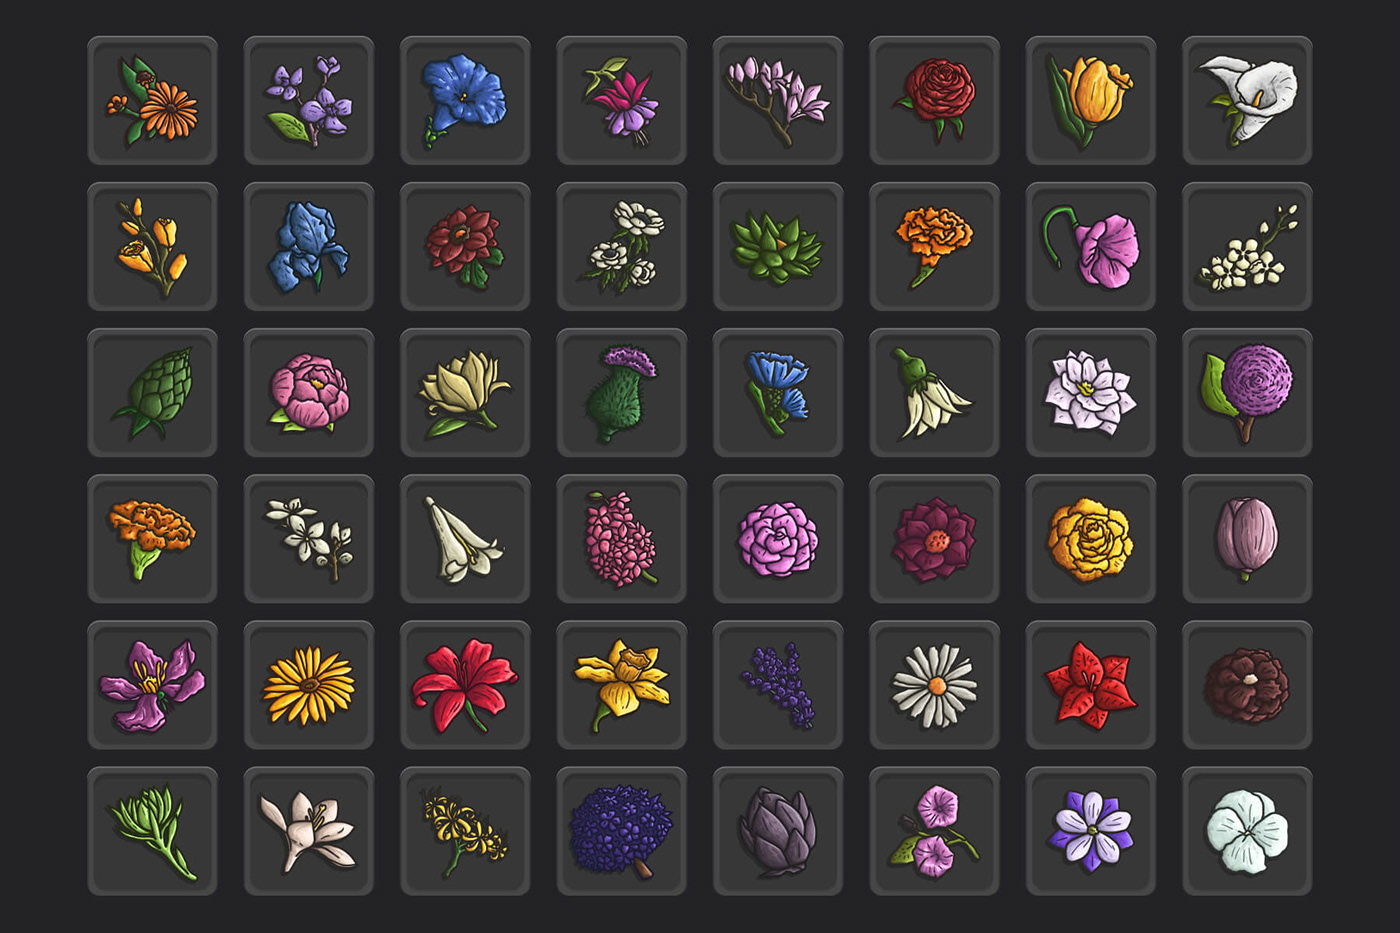 2D art asset assets flower Icon icons indie mmorpg rpg